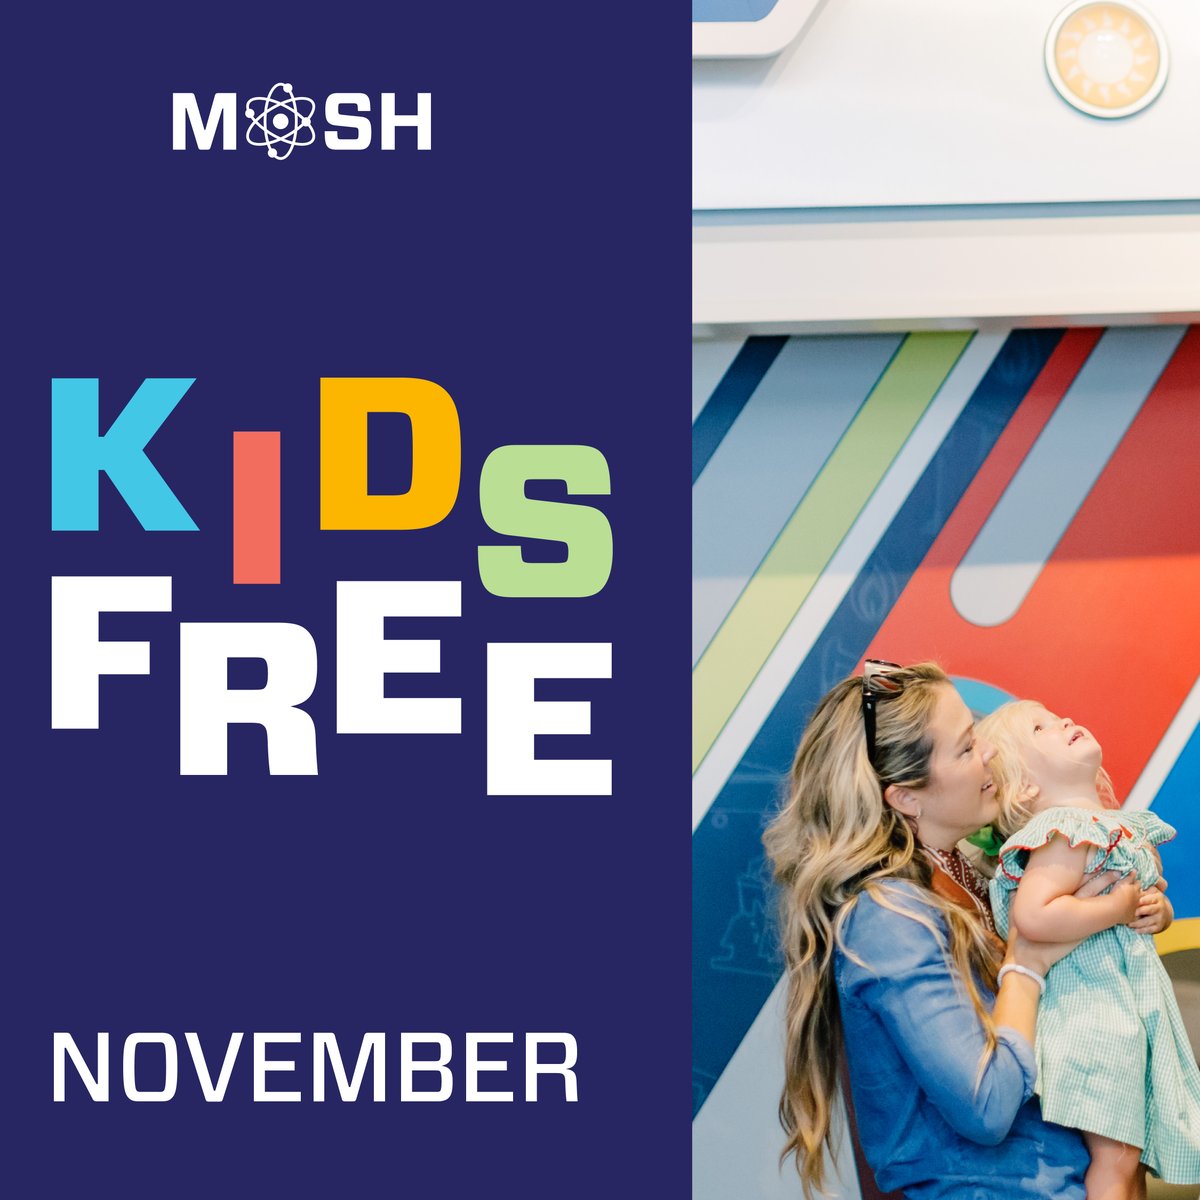 Kids get in FREE this November! In partnership with Visit Jacksonville, up to 5 children (ages 3 – 12) get in FREE per paying adult all month long. No coupon necessary. We can't wait to see you at MOSH!